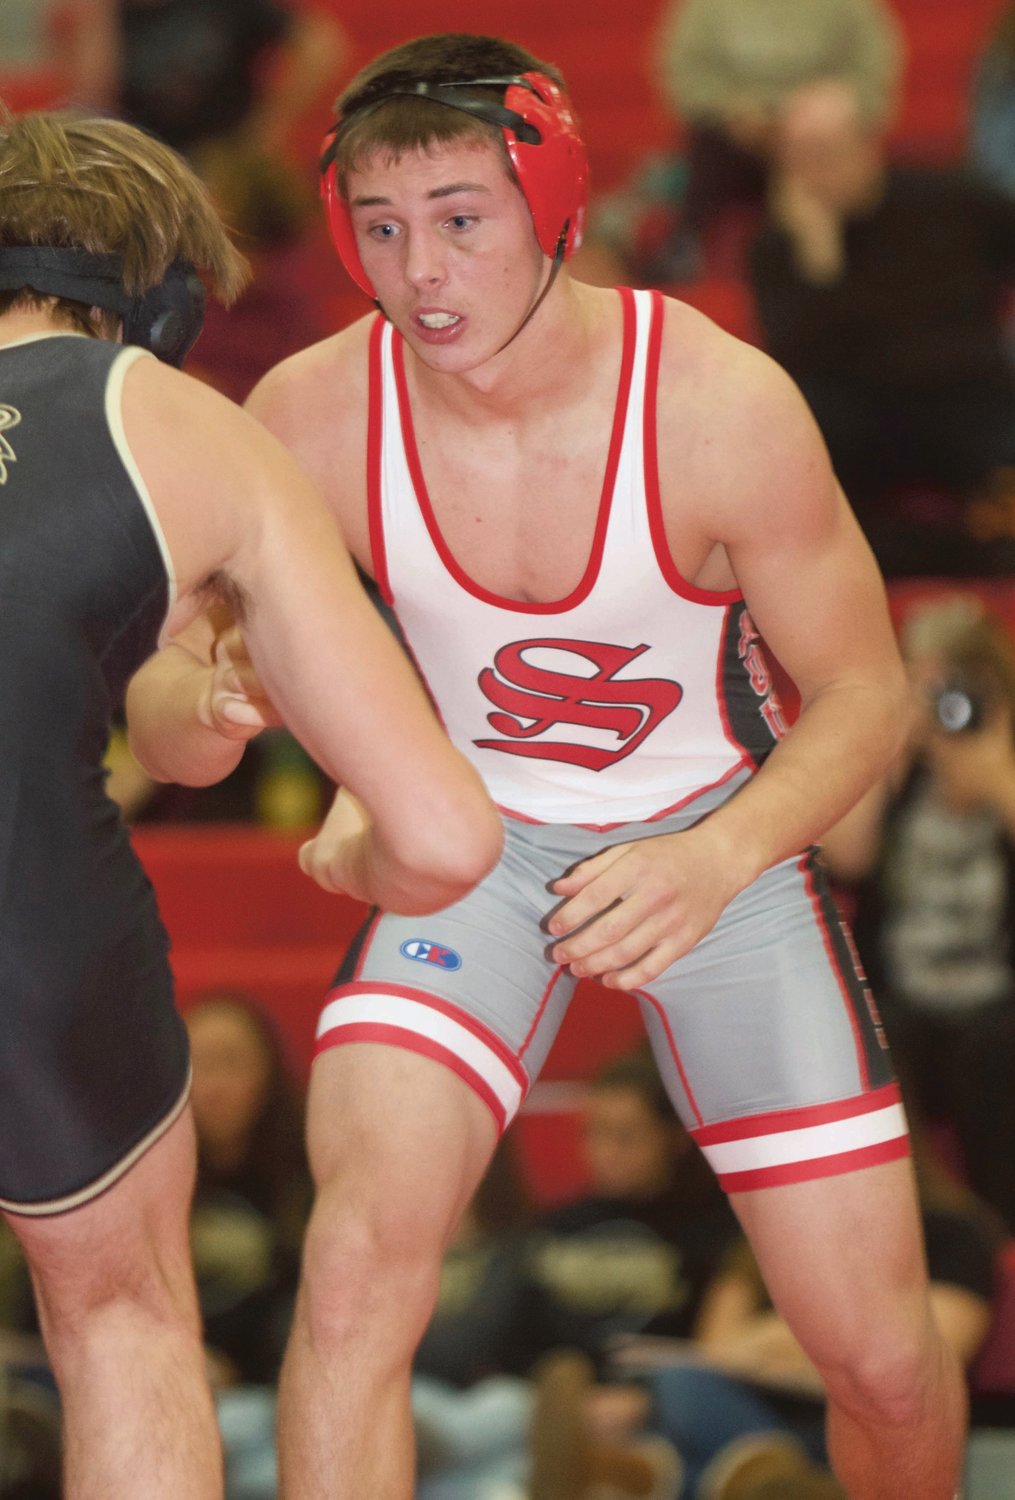 Southmont grad Boone Welliever placed 3rd in the state as a senior.